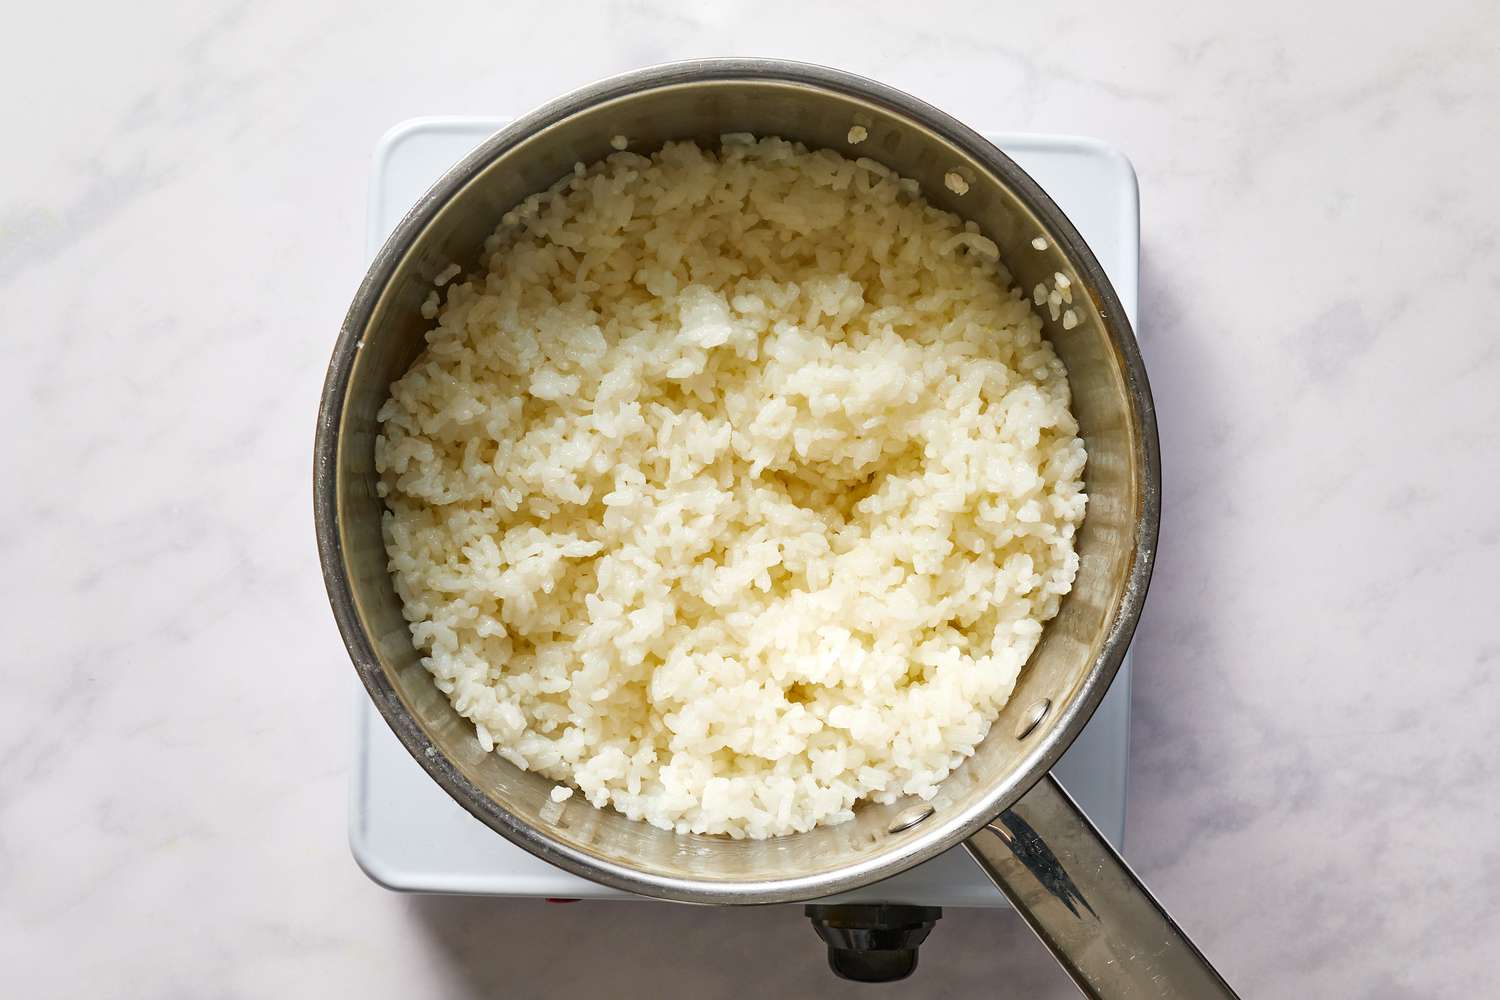 Cook rice on stove in a pot